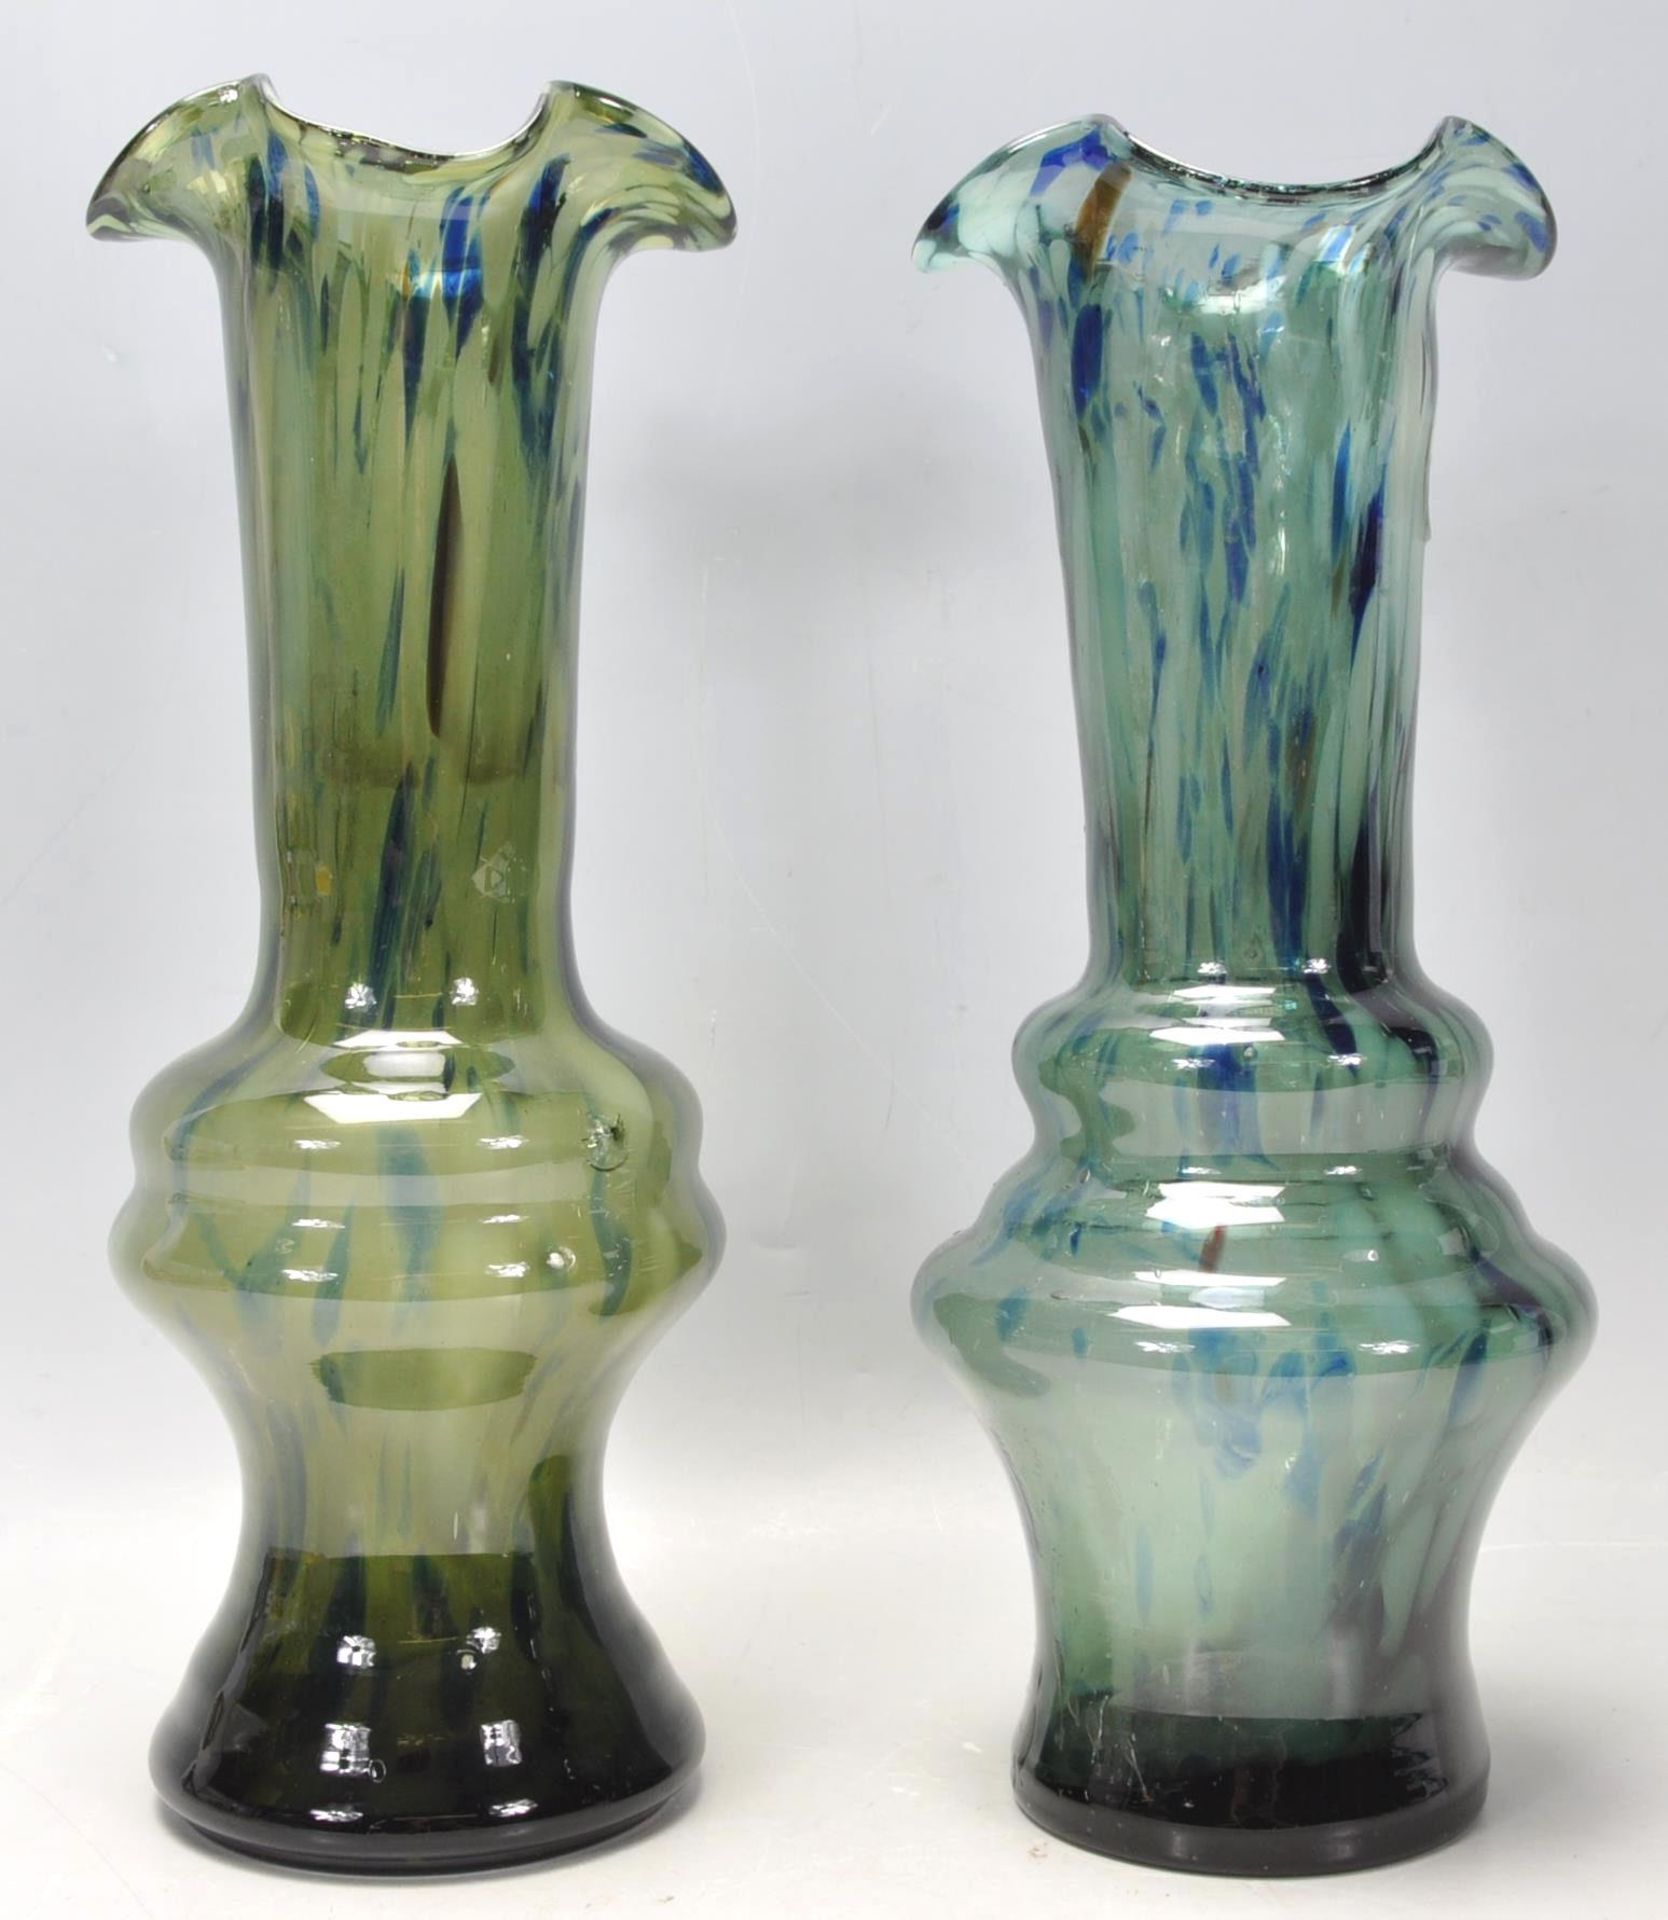 A pair of 20th Century vintage retro studio art spatter glass vases in a blue and green colourway